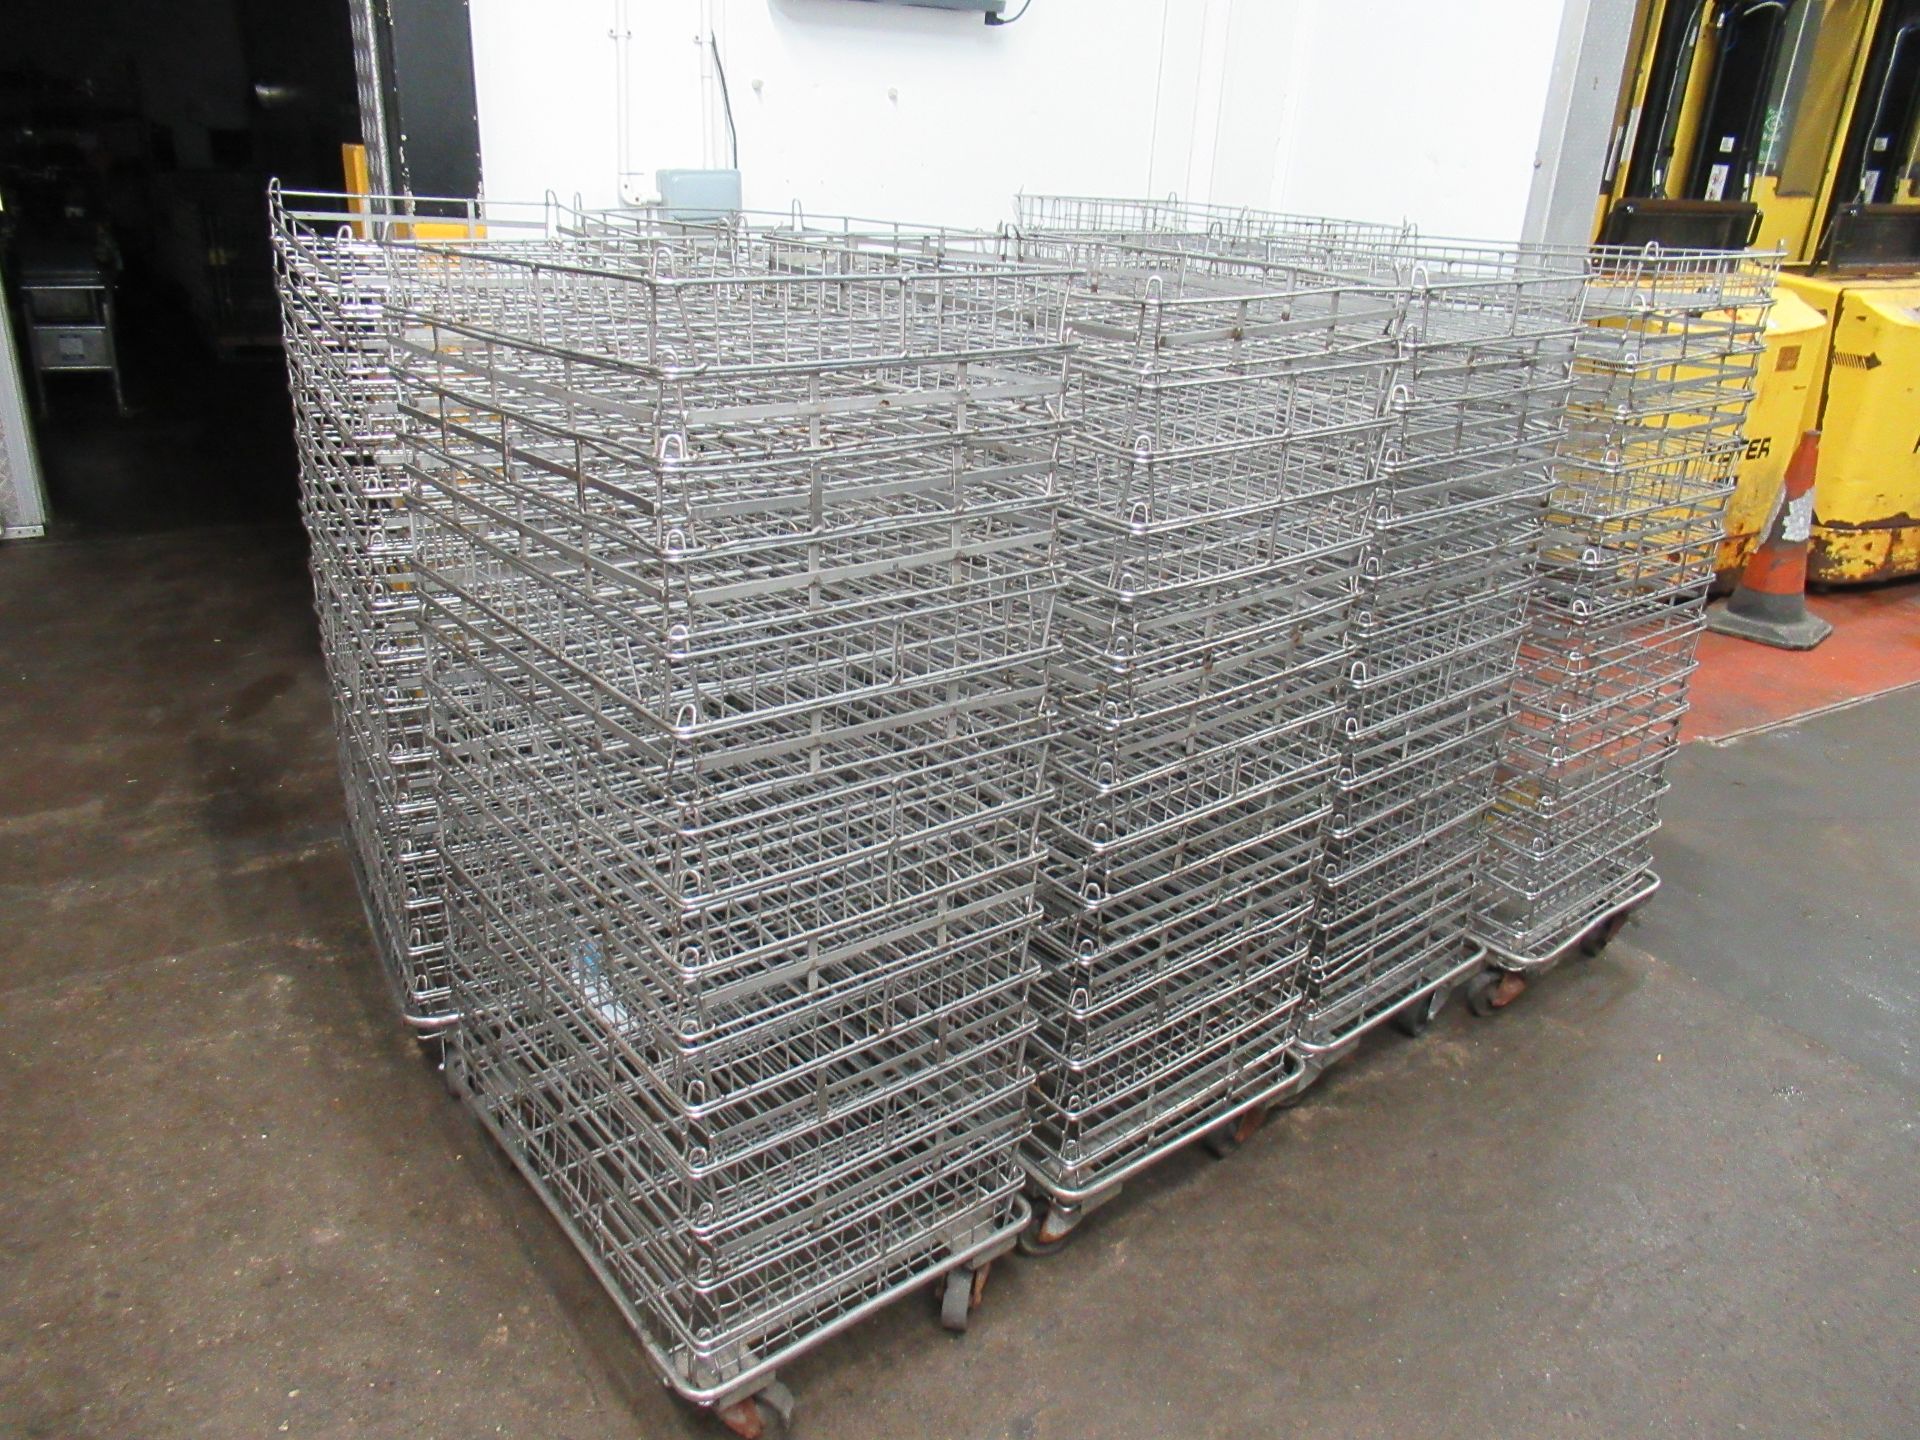 420 Stainless steel wire mesh stacking baskets, 800 x 520 x 75mm high, with 30 dollies - Image 2 of 4